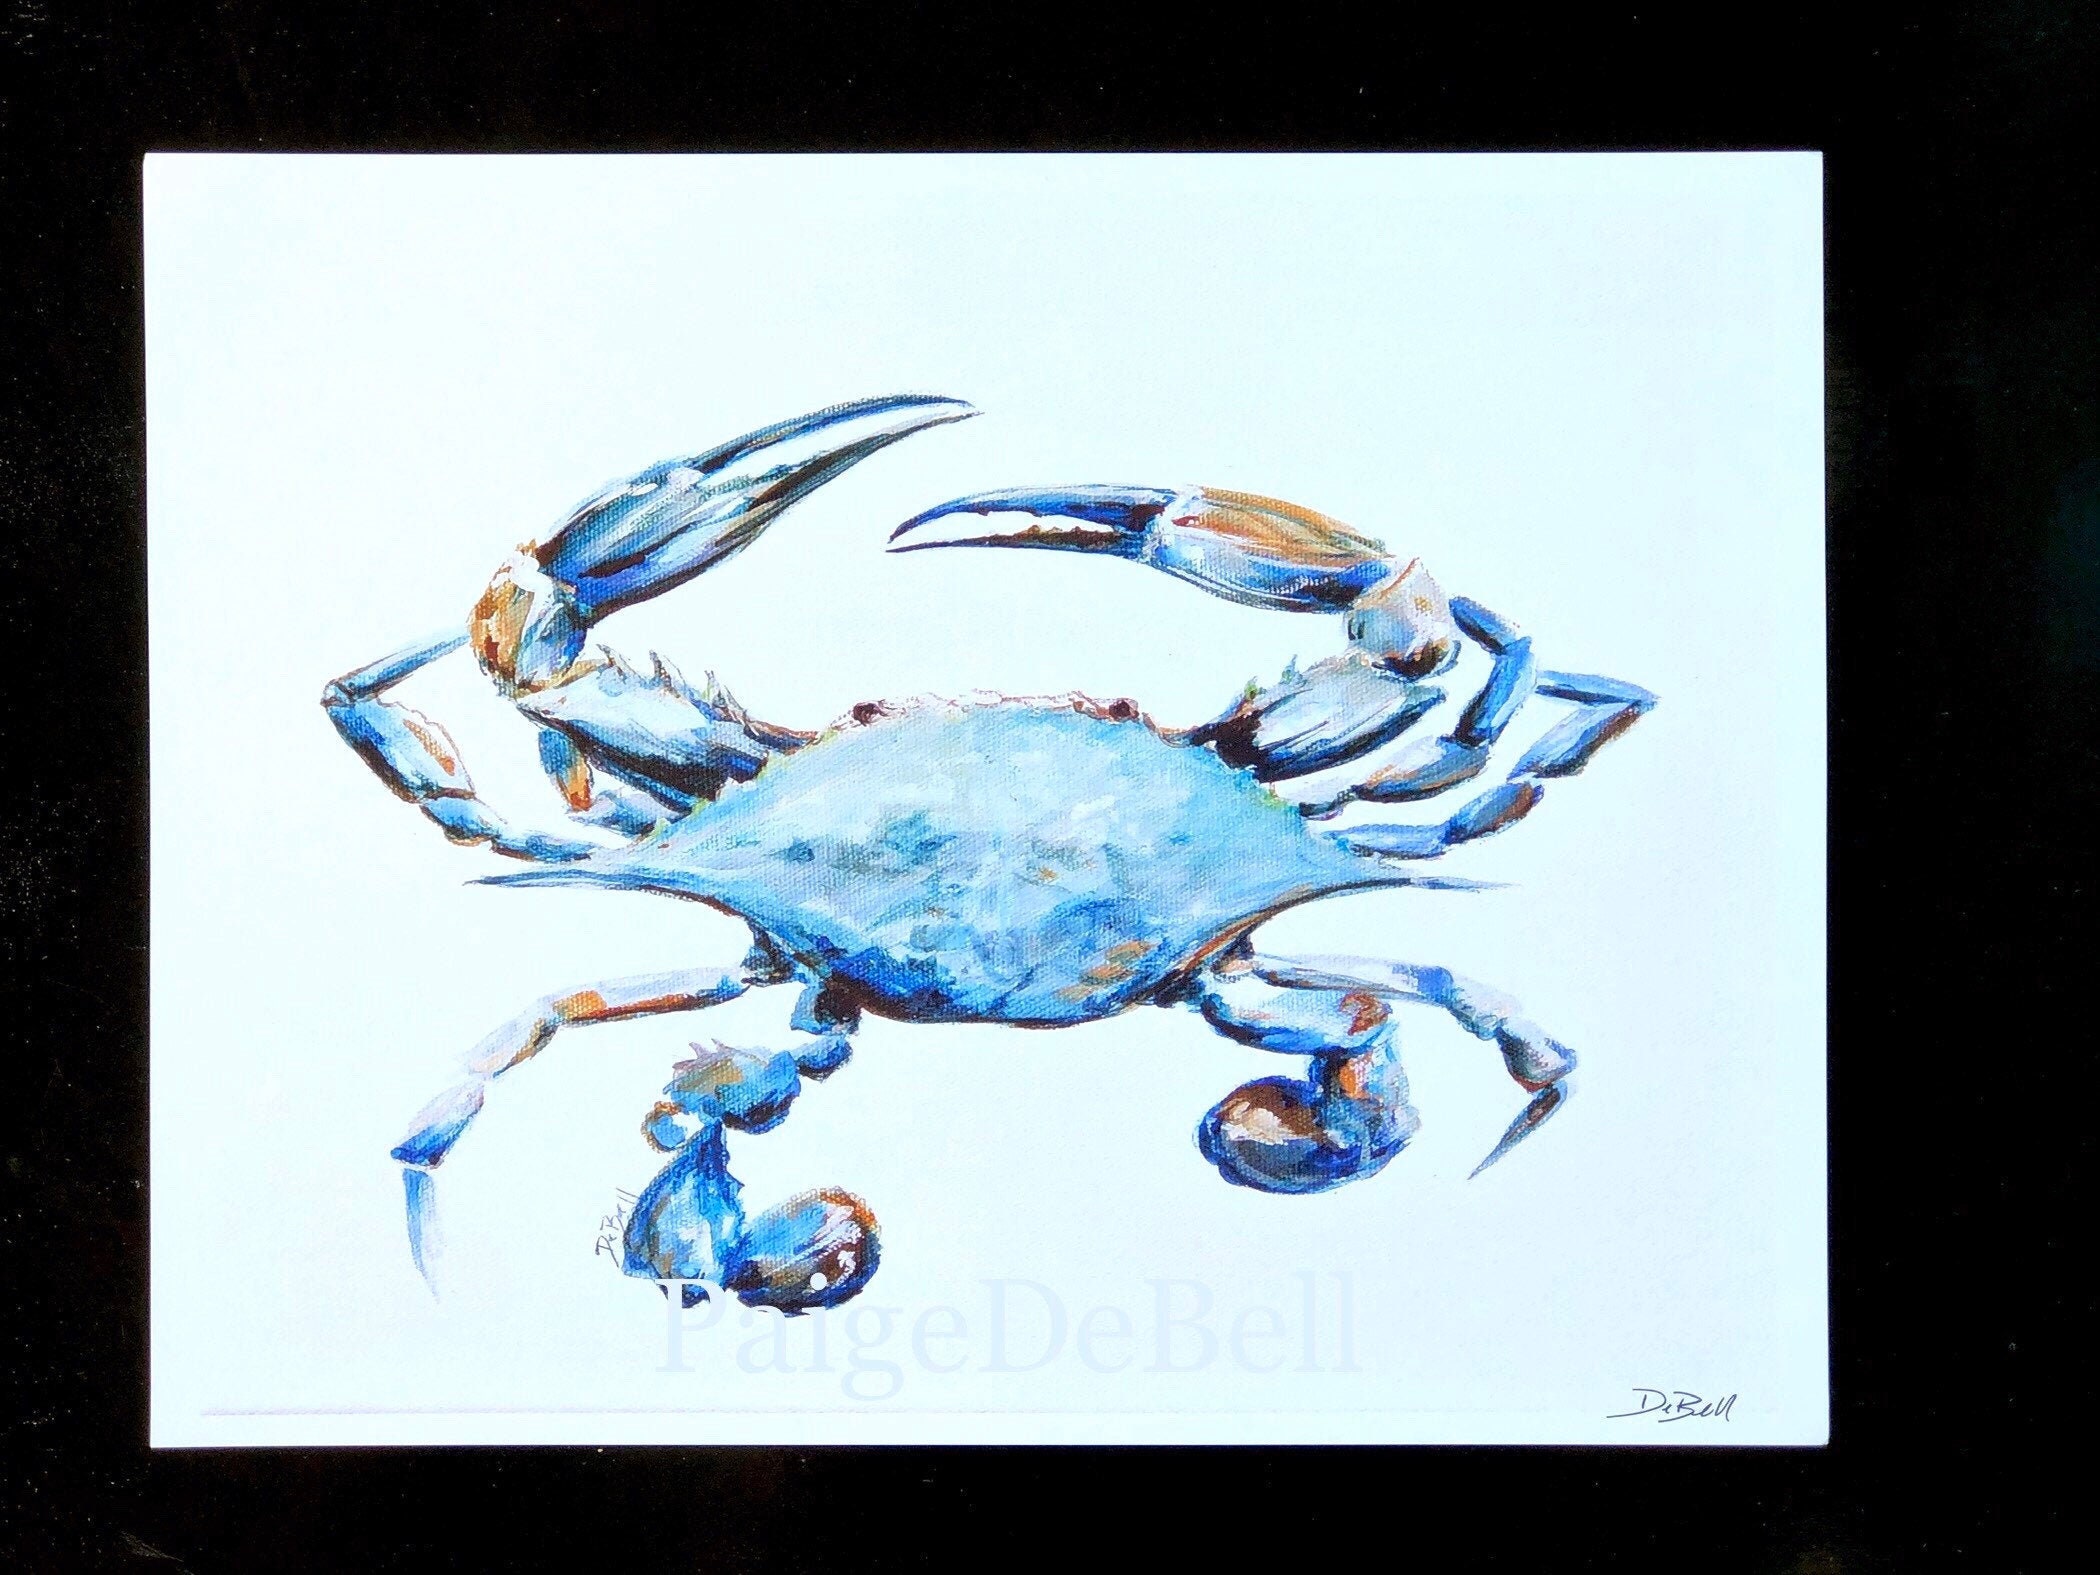 Paige DeBell BABY BLUE CRAB Painting** 11 x14 Print of my original Crab Painting by New Orleans artist